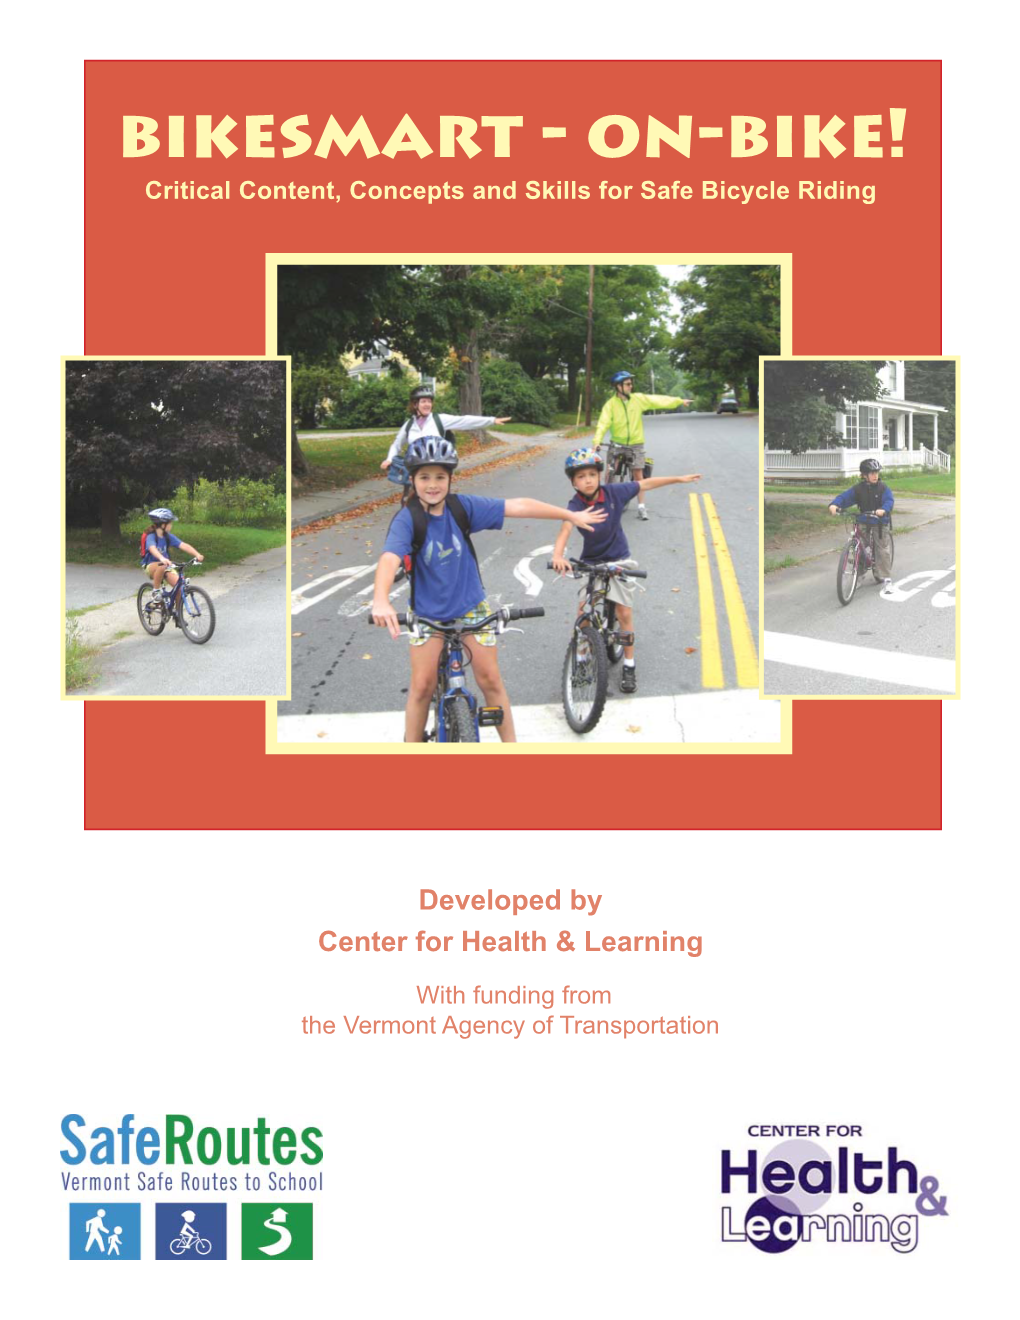 Bikesmart - On-Bike! Critical Content, Concepts and Skills for Safe Bicycle Riding